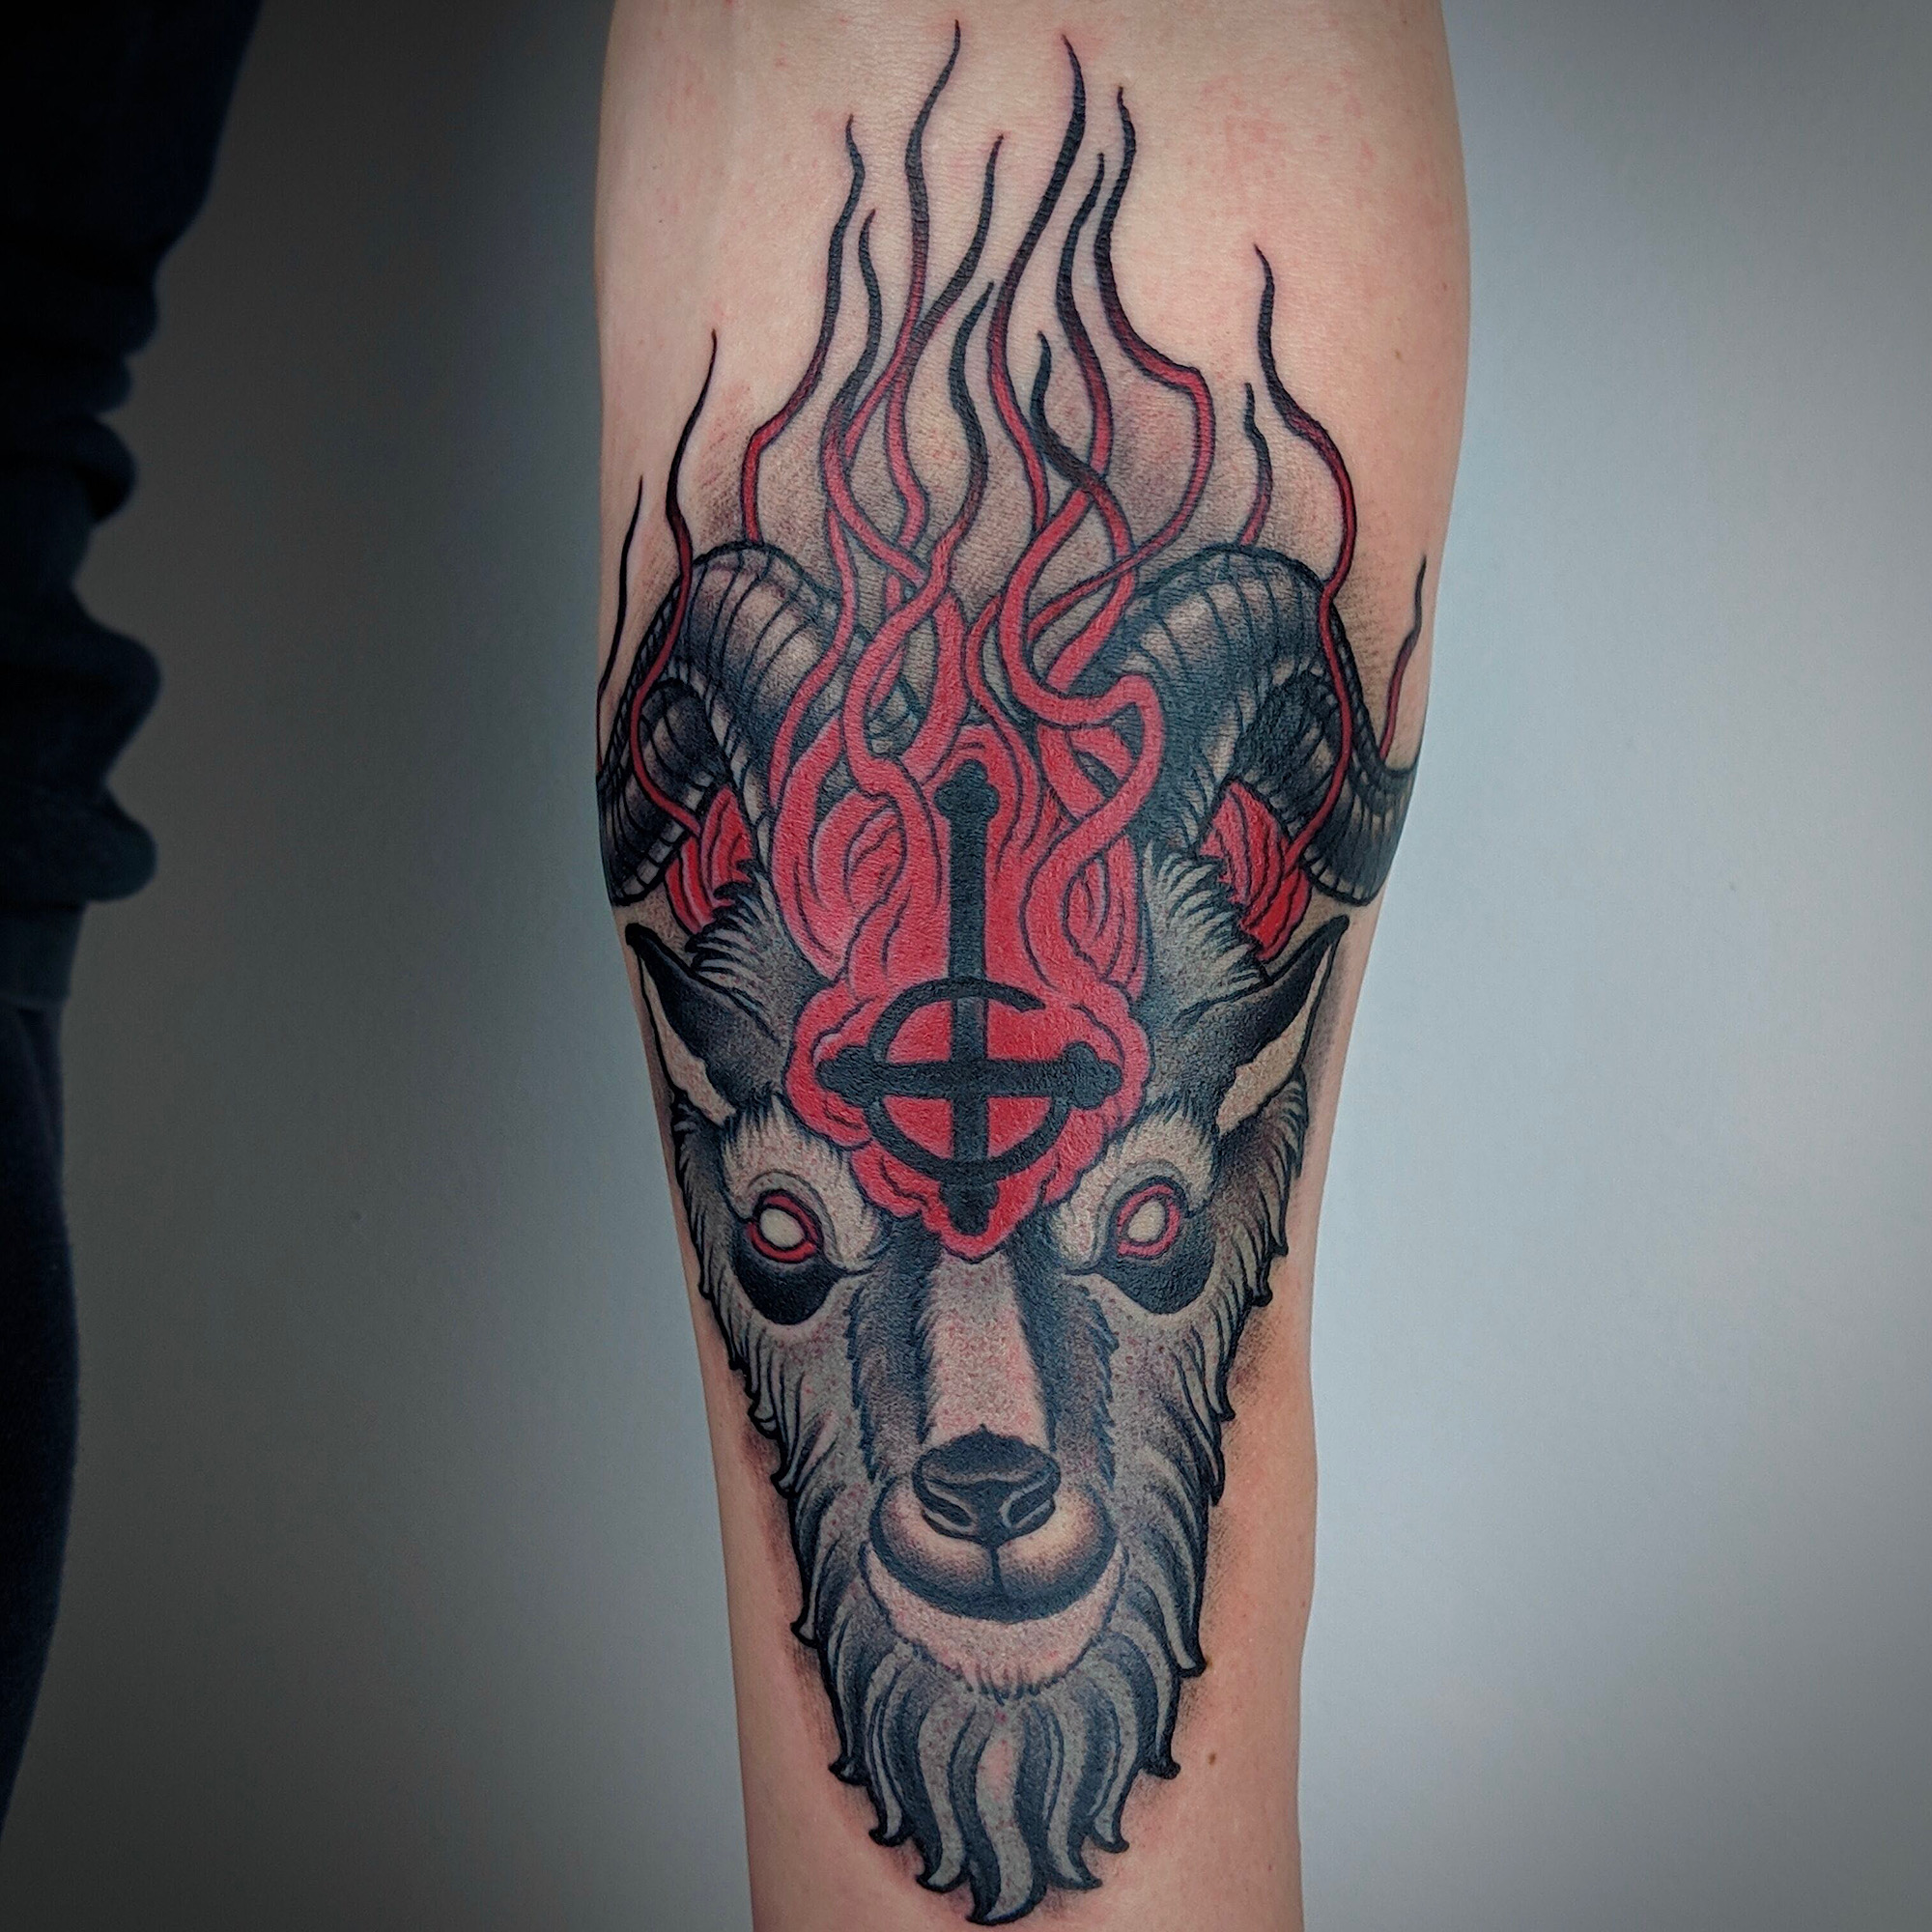 Ghost band logo in a dual tone satanic goat mutton in flames by ricks custom tattooing Ricardo Pedro